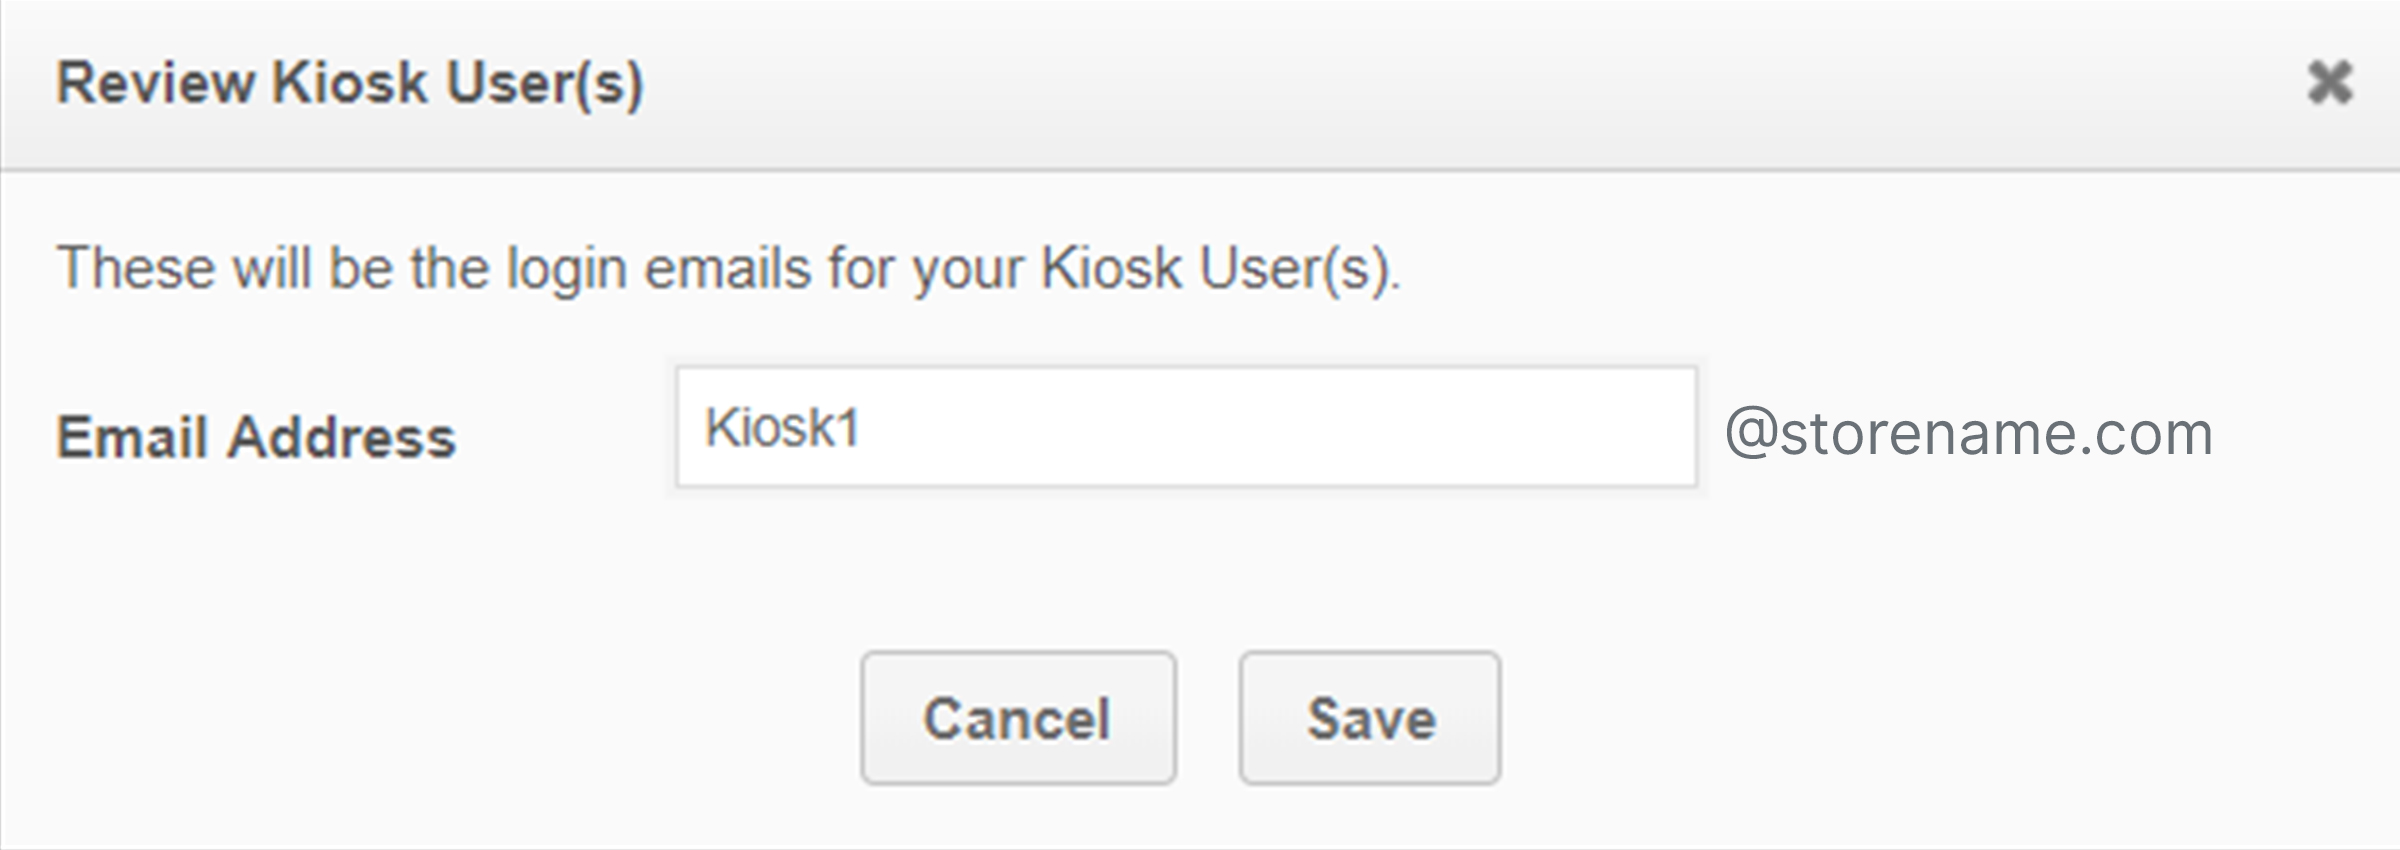 A screenshot of the Review Kiosk User(s) popup. This screen asks you to create a login email address for the kiosk users you are creating. These will not be real email addresses, but instead will end in @storename.com.